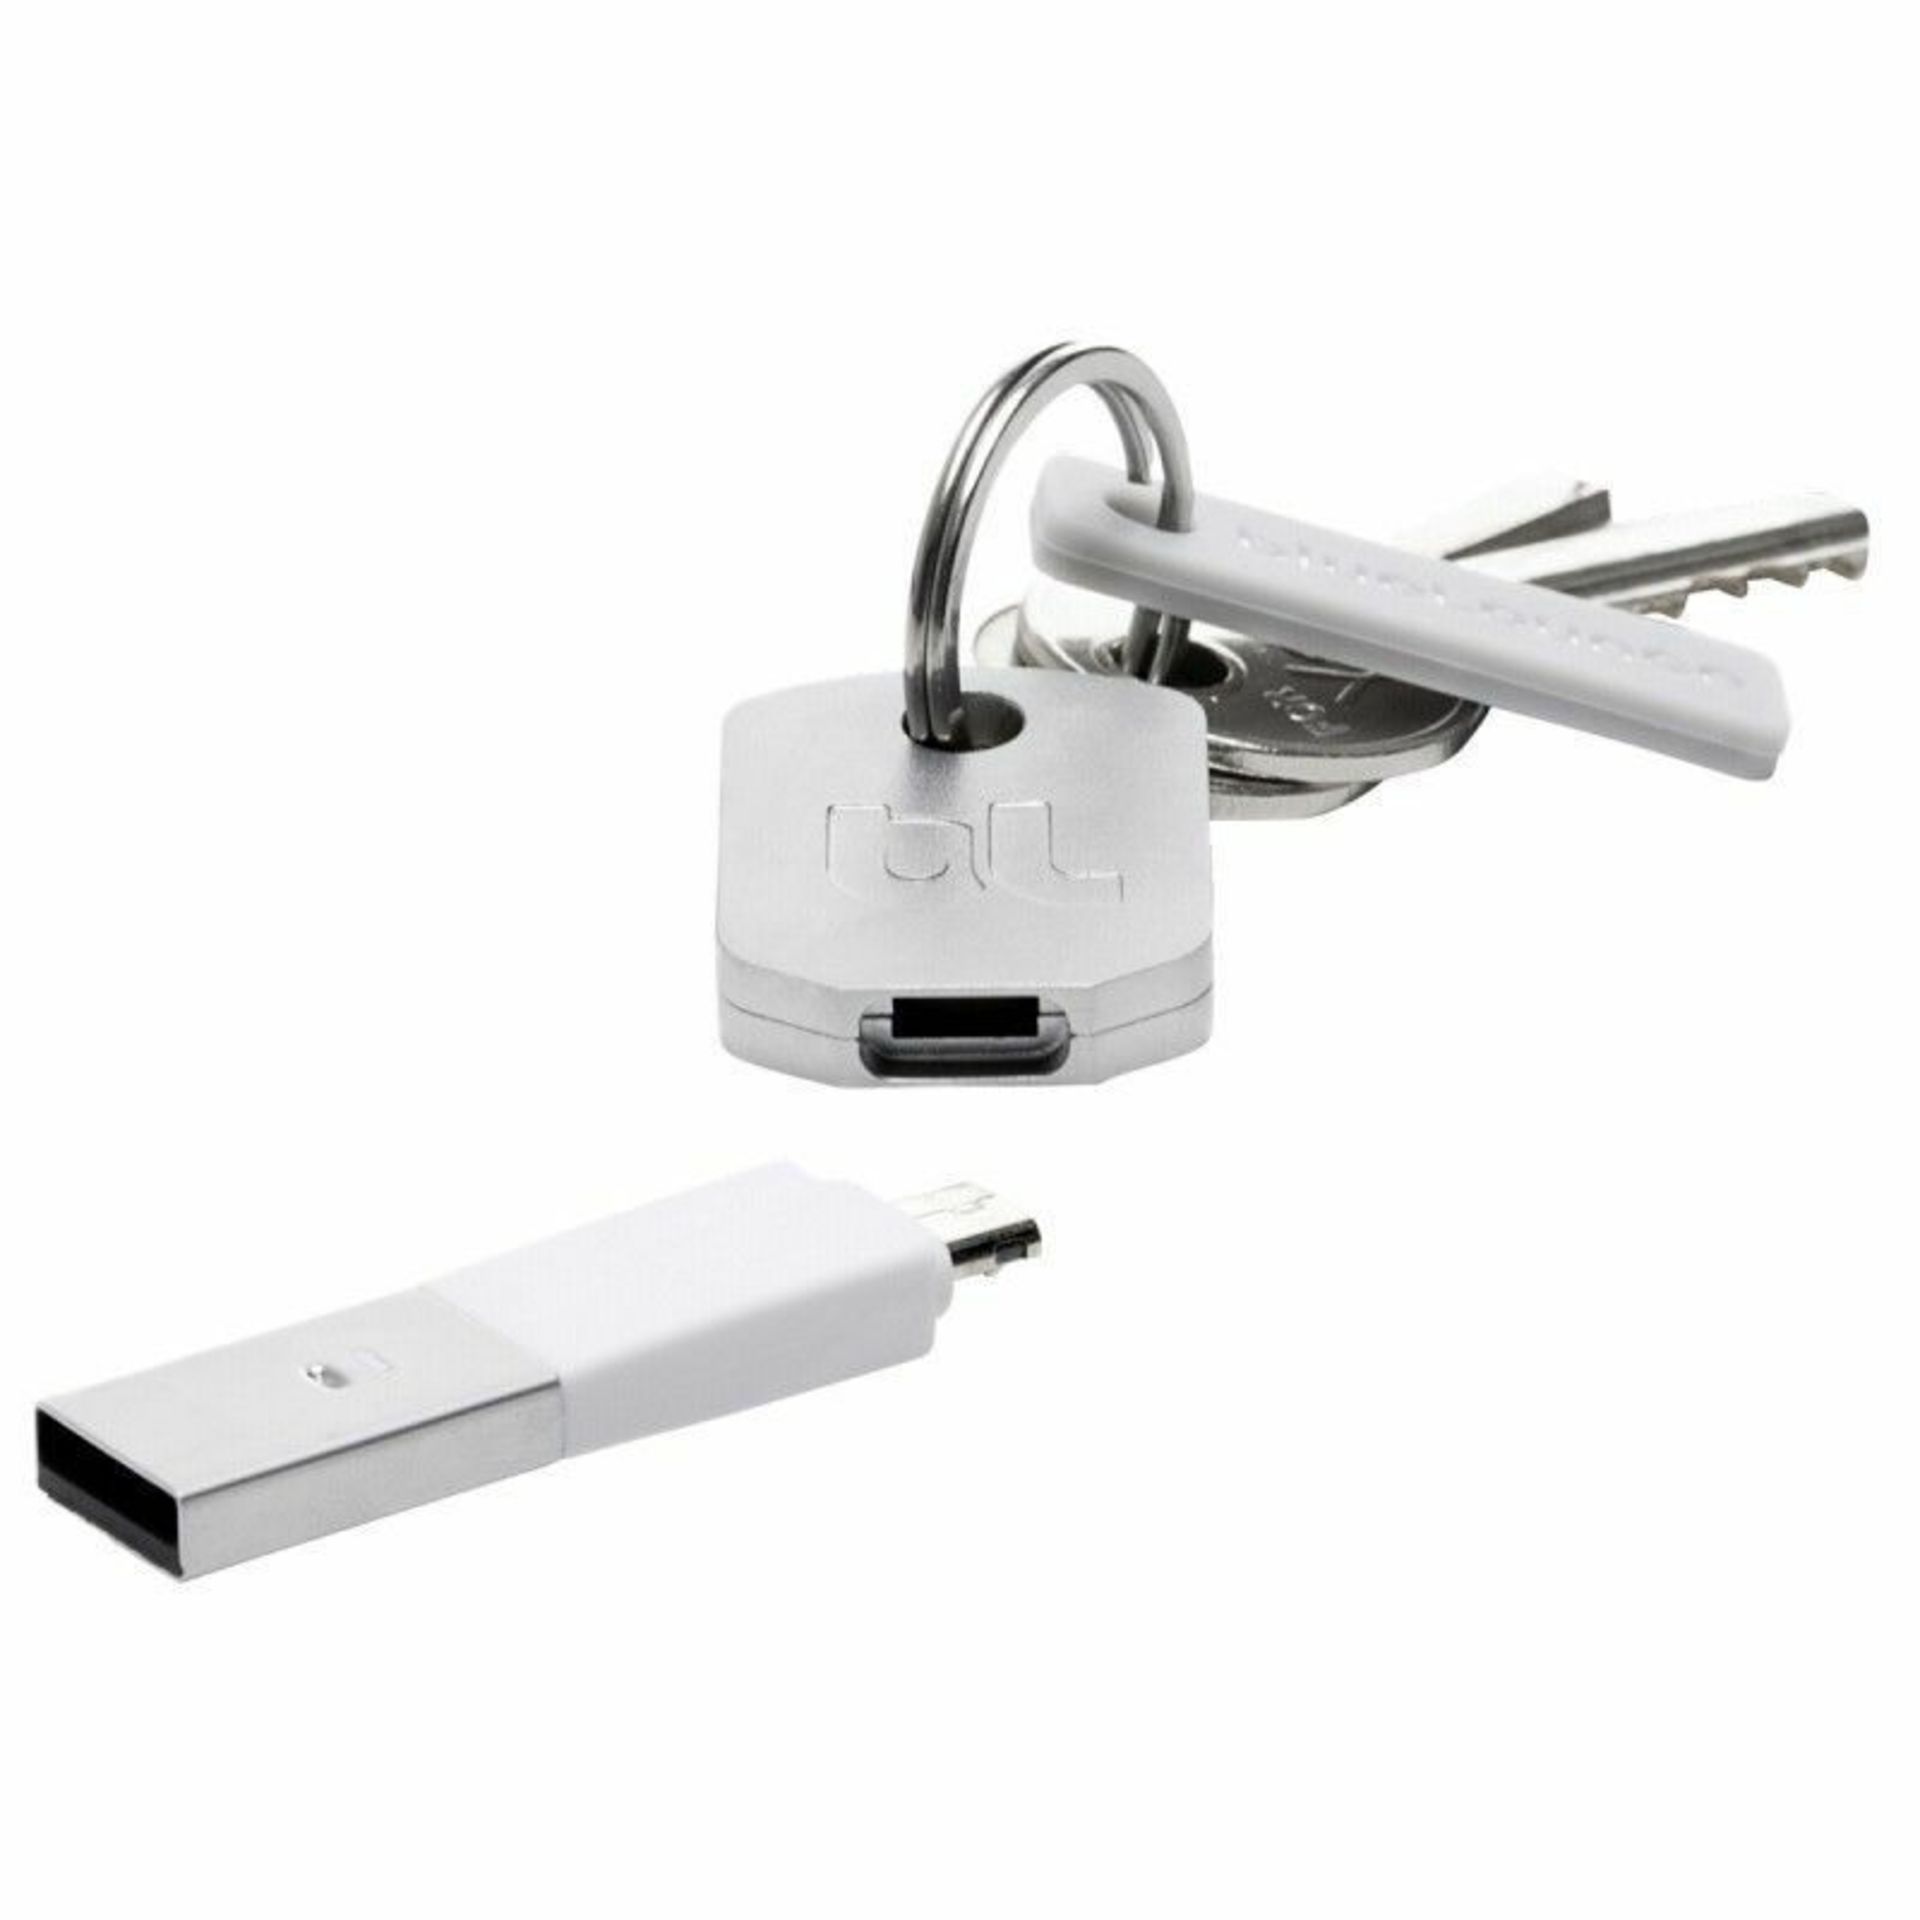 Bluelounge Kii USB(M) to Lightning(M) Adapter for Apple devices - White - Image 2 of 3